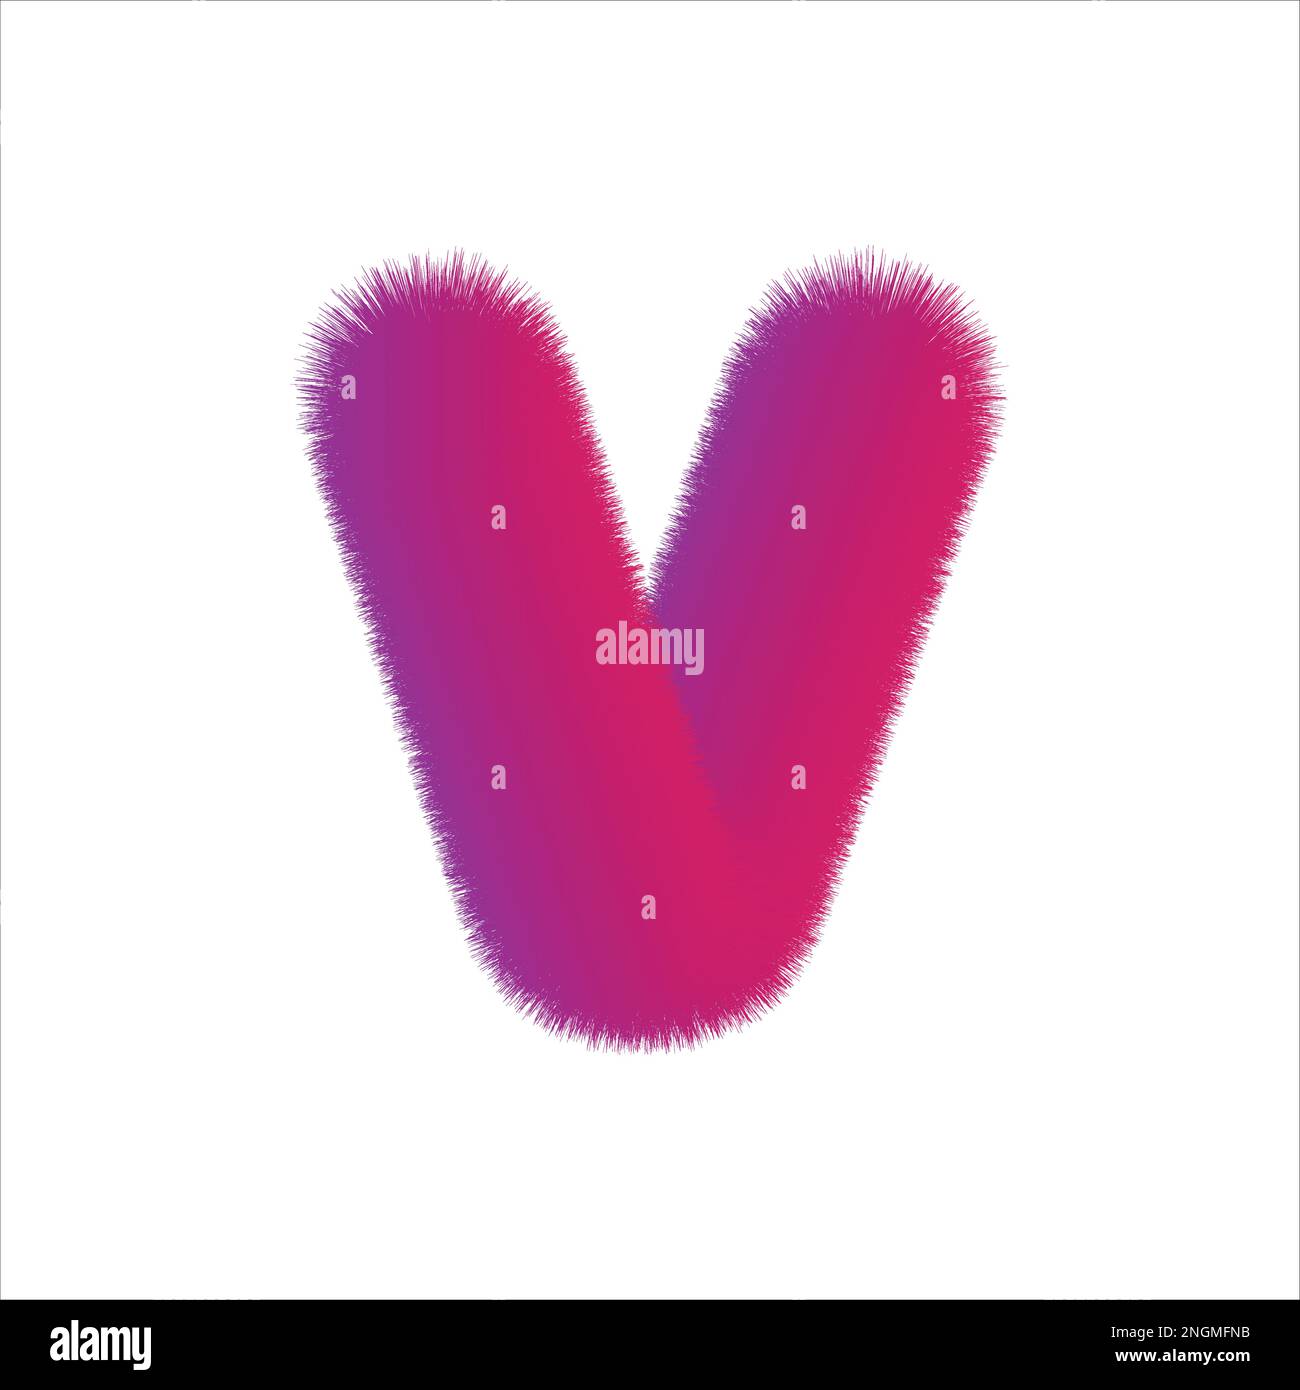 High Quality 3D Shaggy Letter V on White Background . Isolated Vector Element Stock Vector